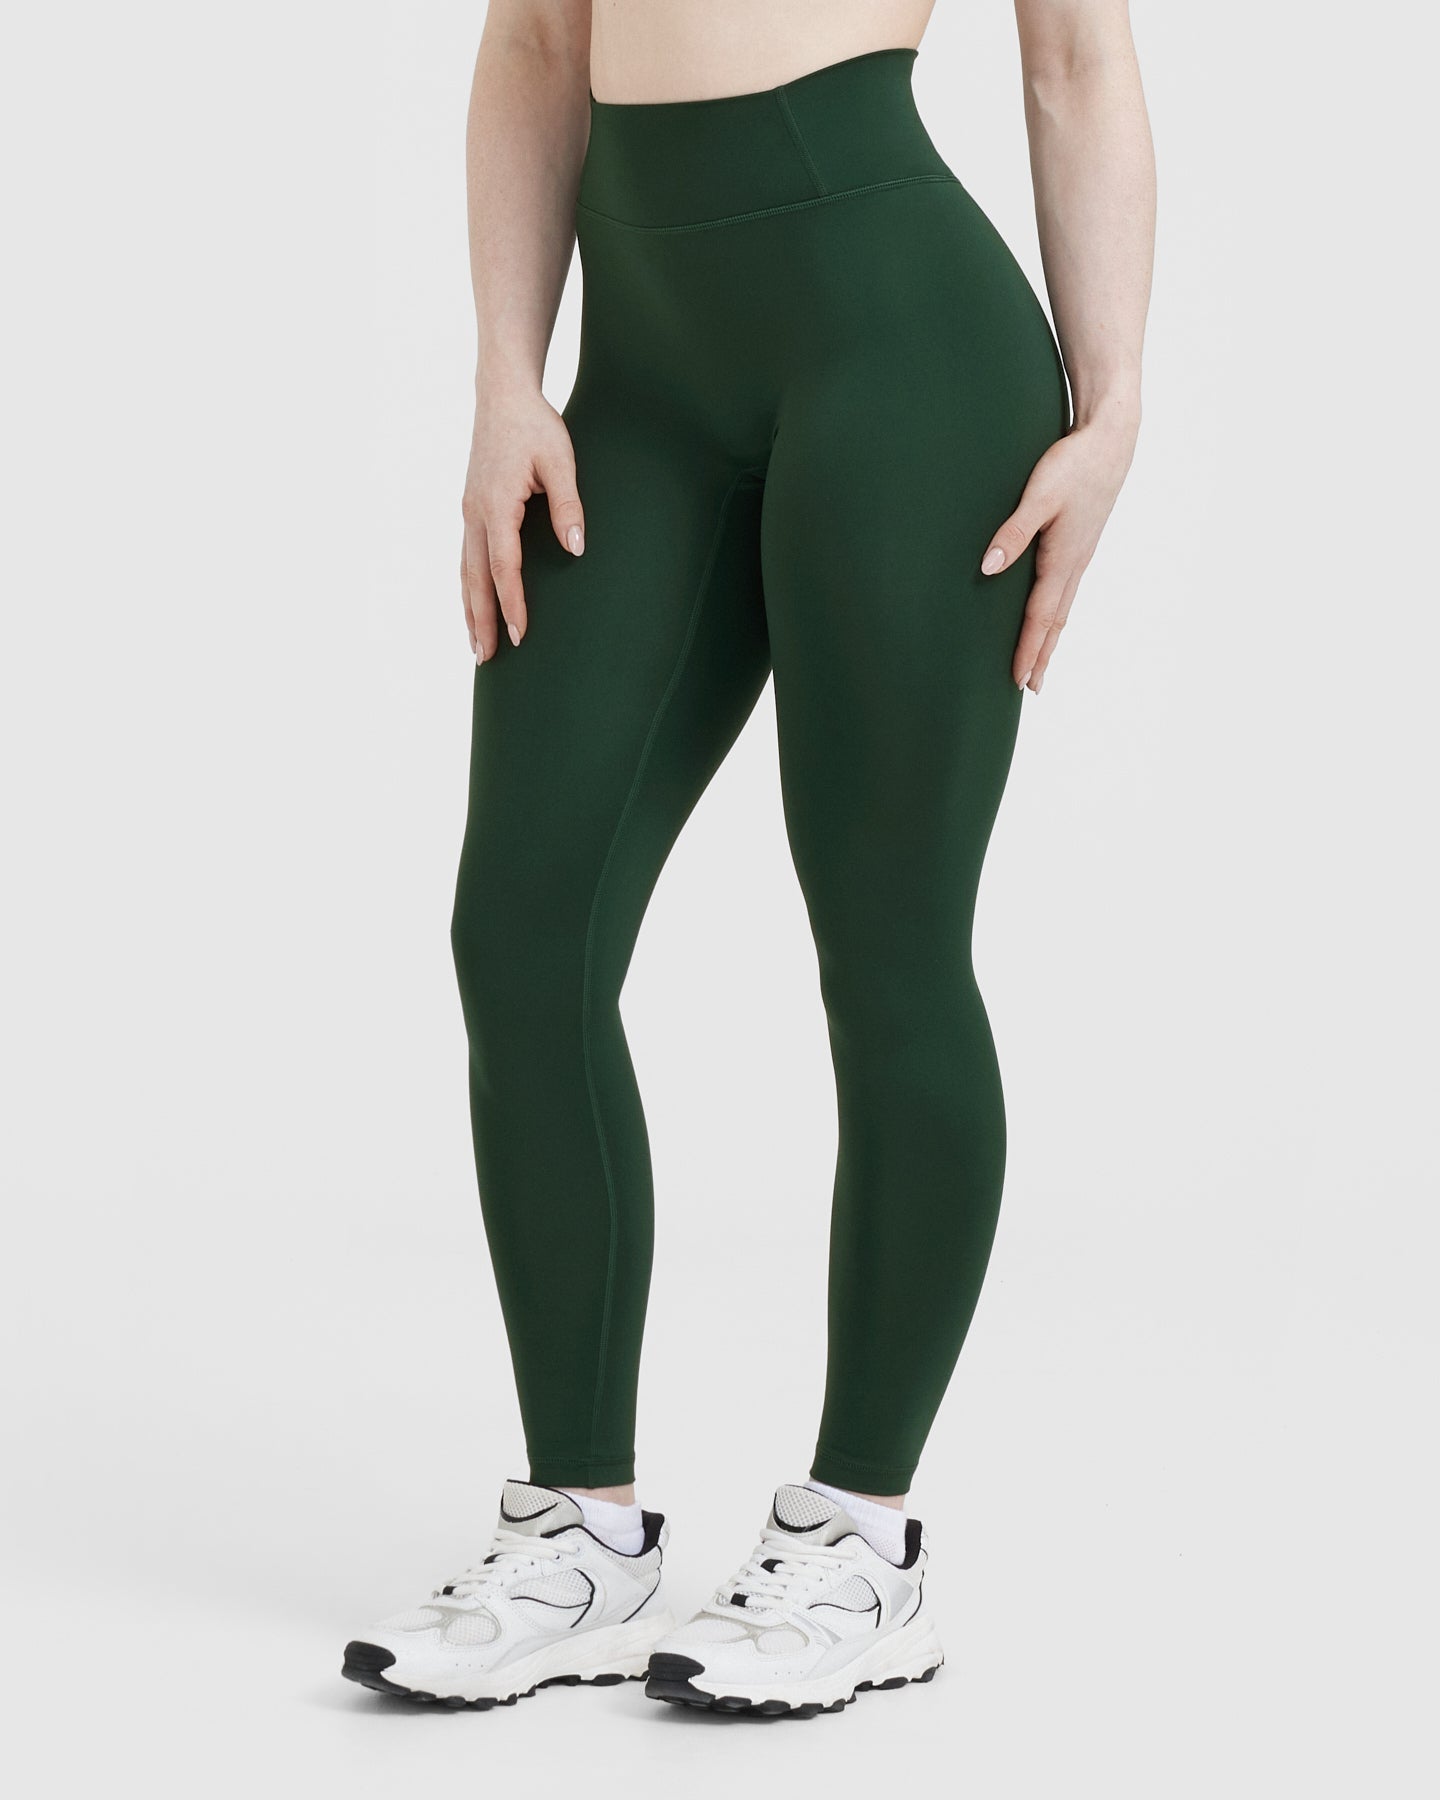 ECHT Leggings Grey With Green Dots Size M (?) High Rise Workout Gym